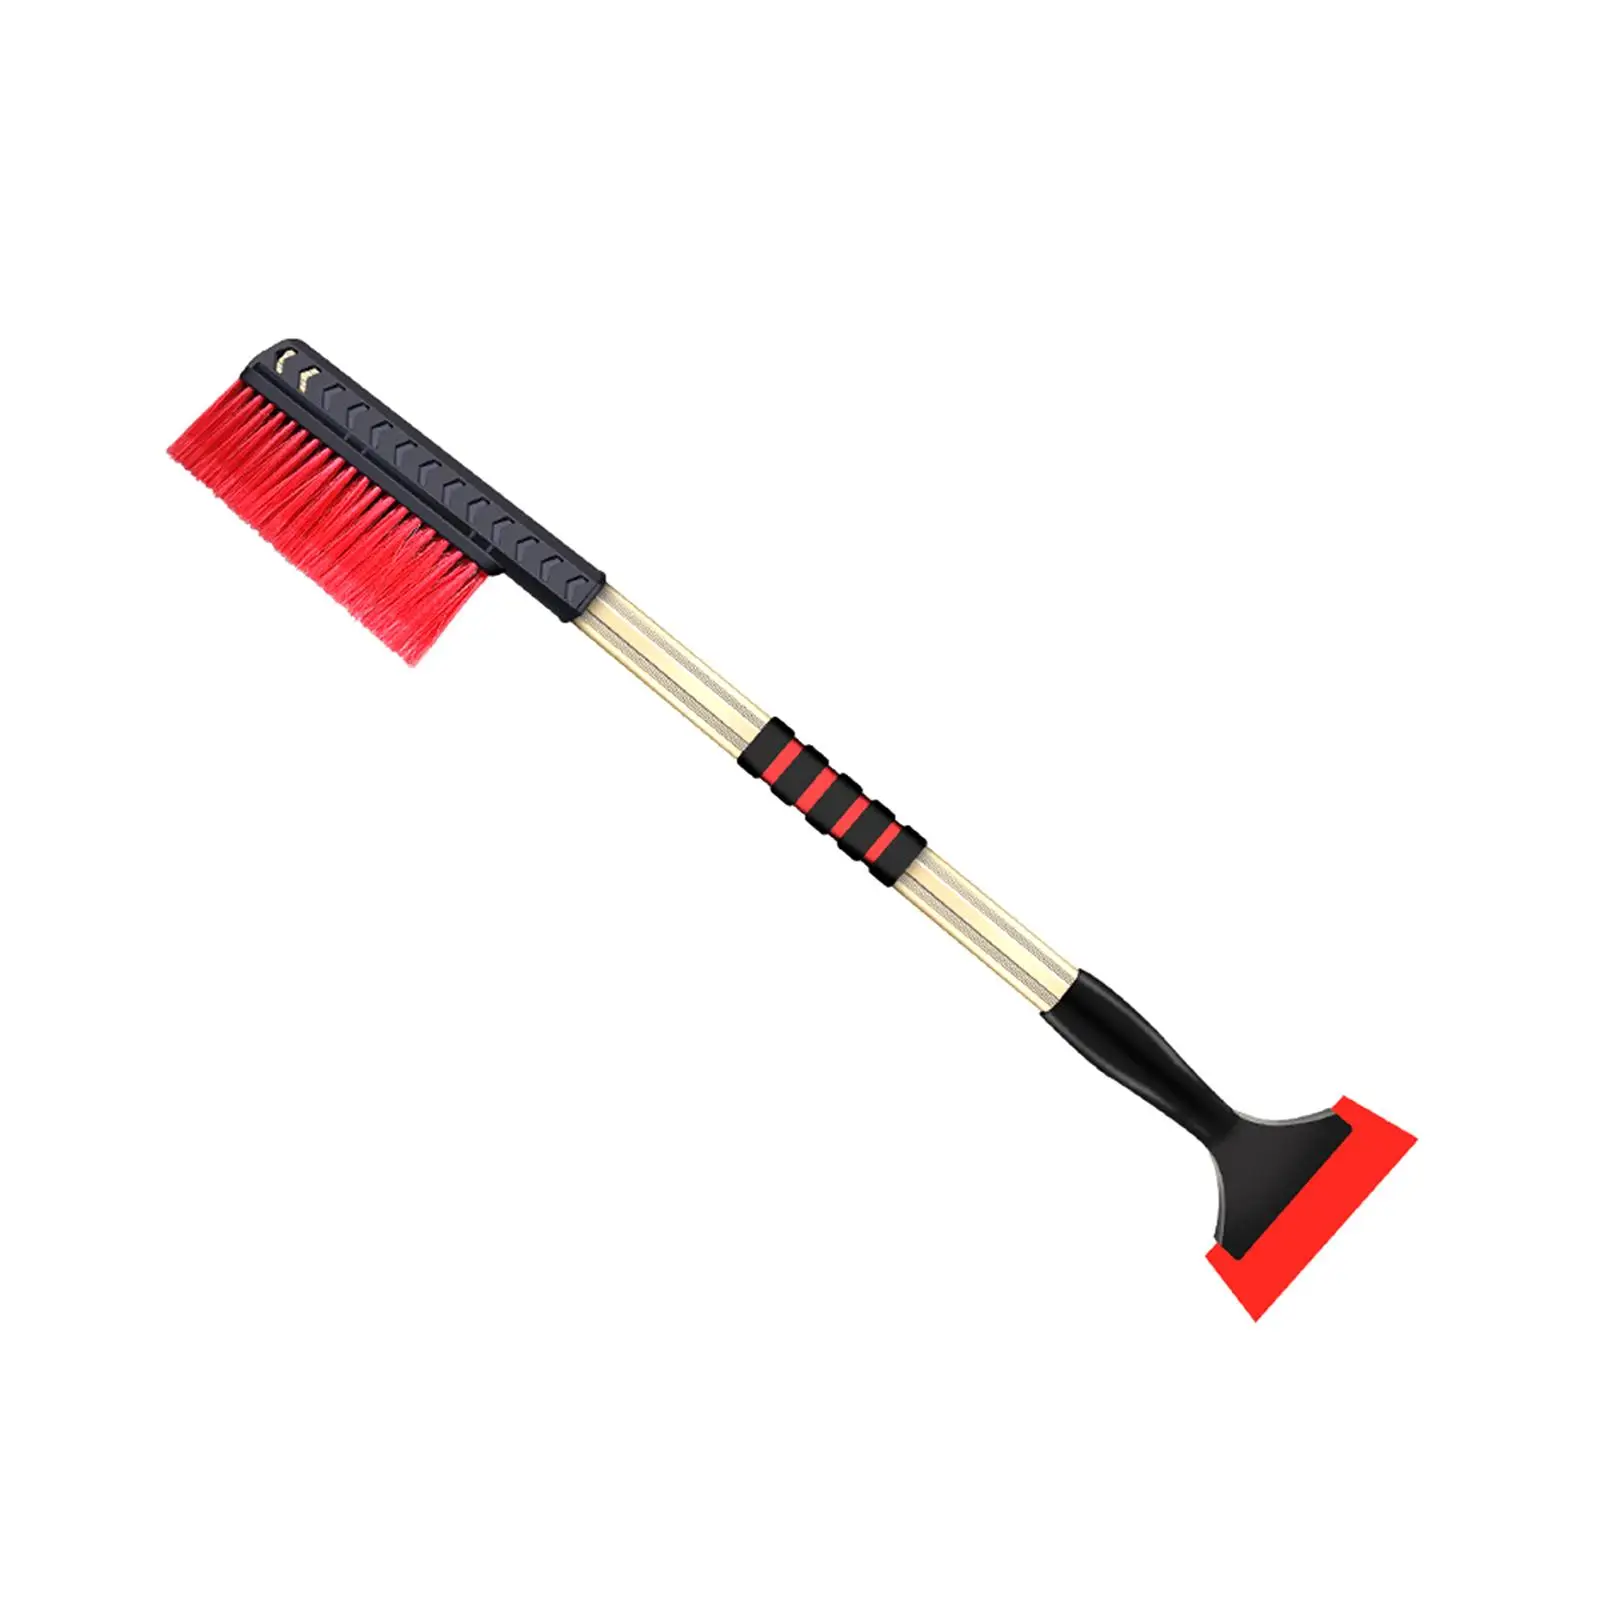 Snow Removal Brush Tool Telescopic Handle Universal for Automotive SUV